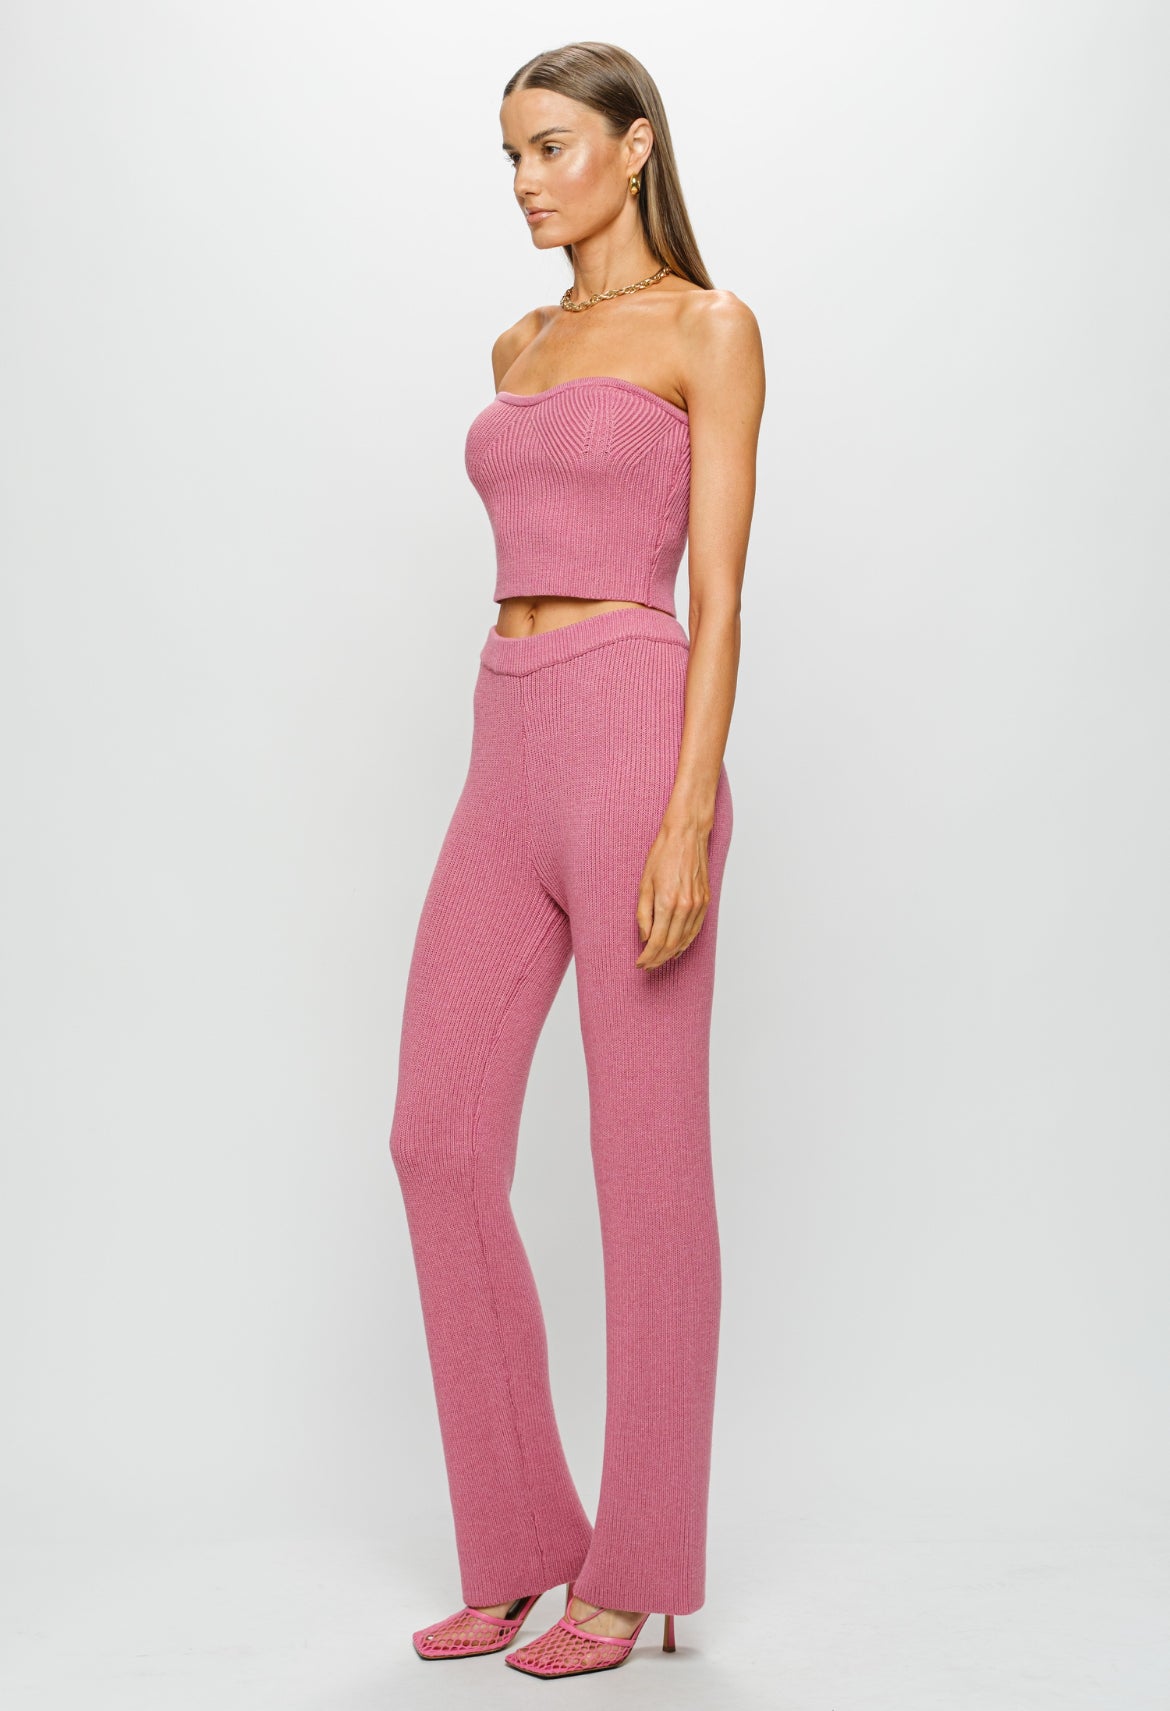 Knit Top and Pants Set in Pink